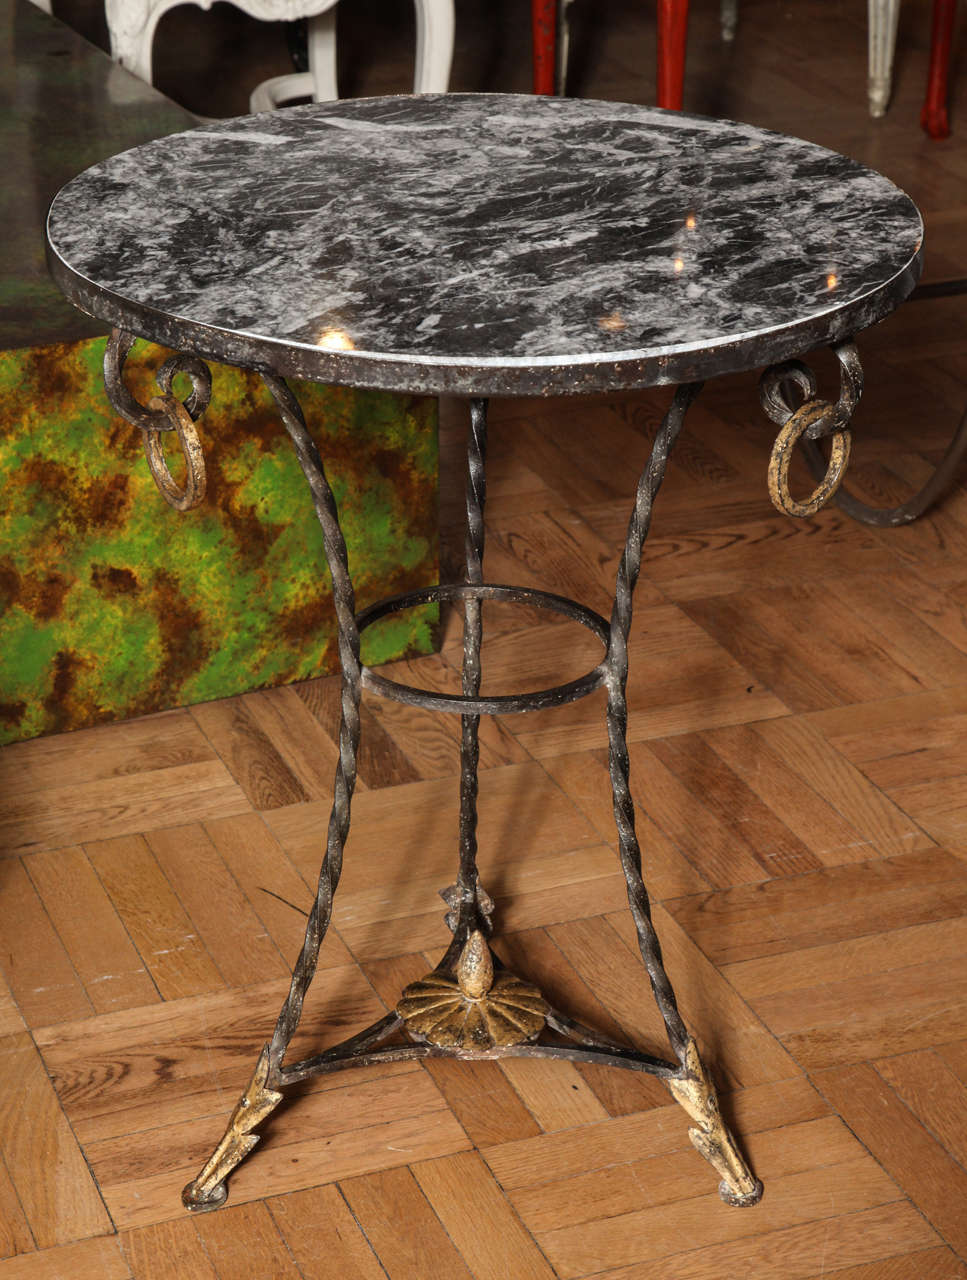 A Very Good LAte 19th/Early 20th Century  Wrought Iron and Parcel Gilt Decorated Marble Topped Gueridon